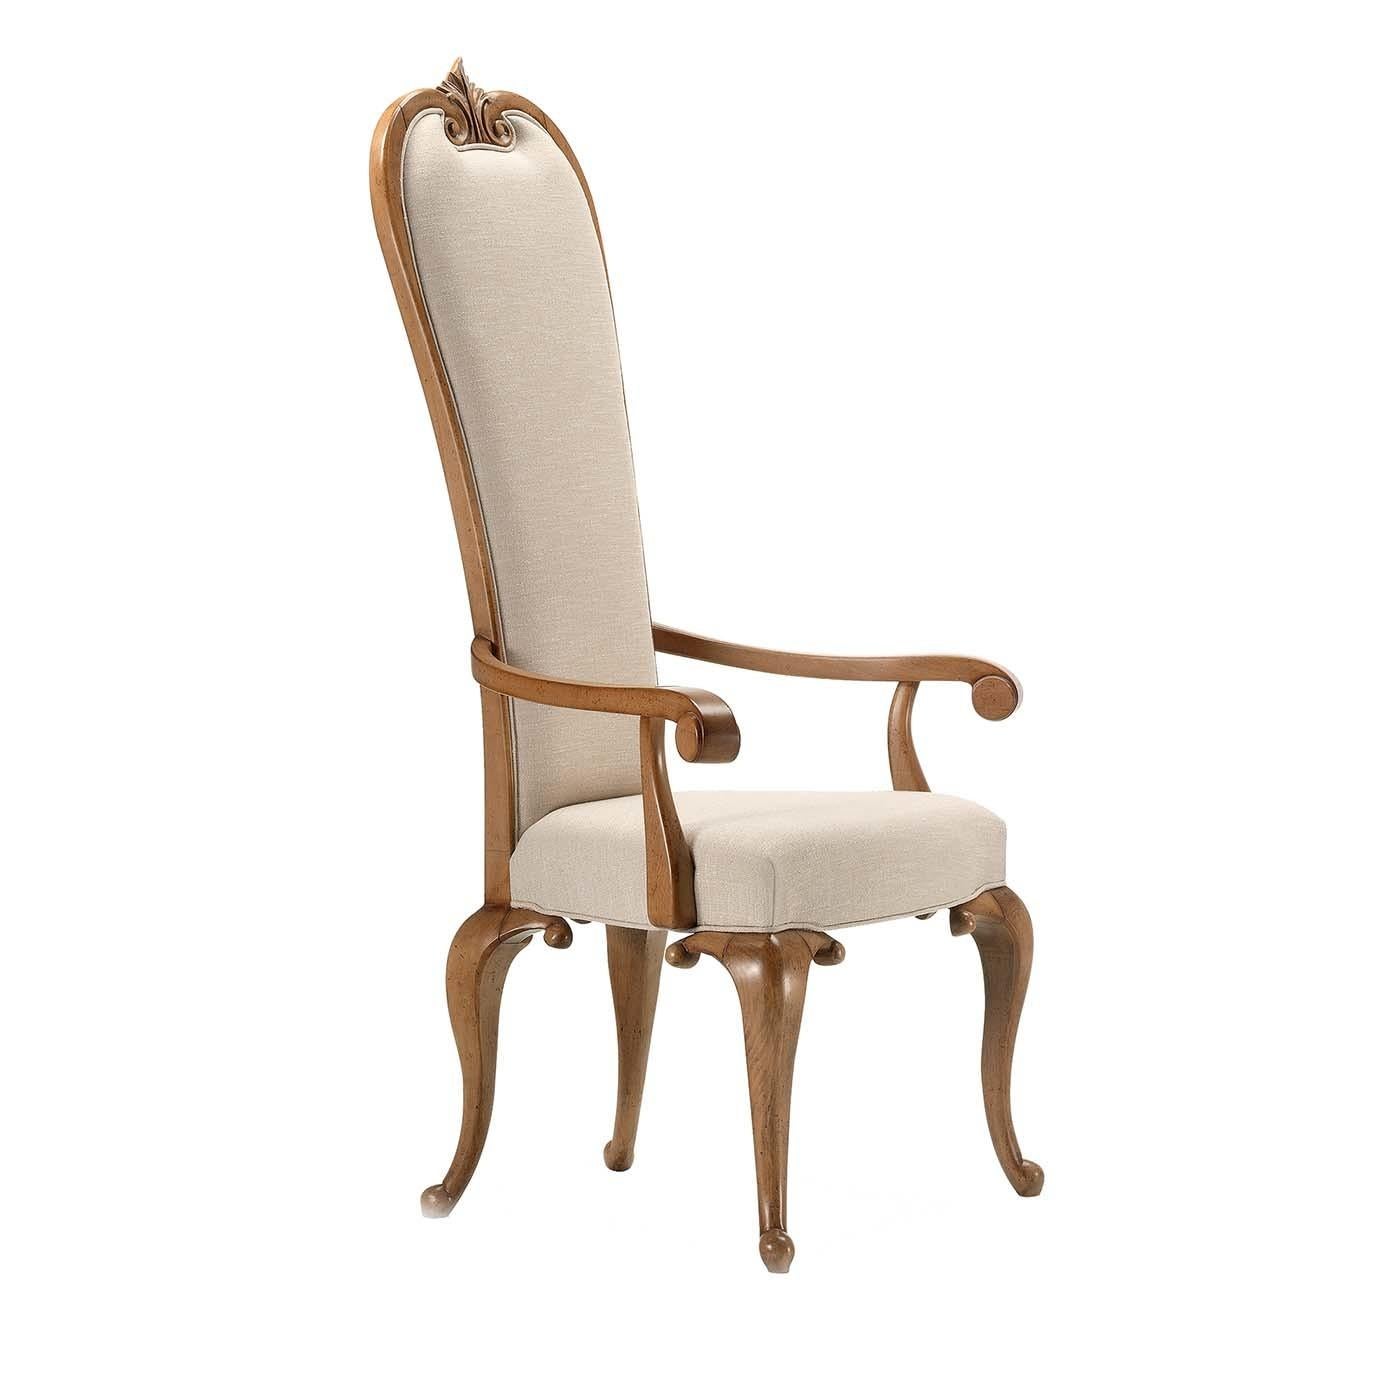 Inspired by Baroque lavishness and boasting a sensual and refined silhouette, this chair with armrests will infuse charm in a dining room, foyer, or be a stately addition to a study desk. The solid wood frame is crafted by hand and exudes